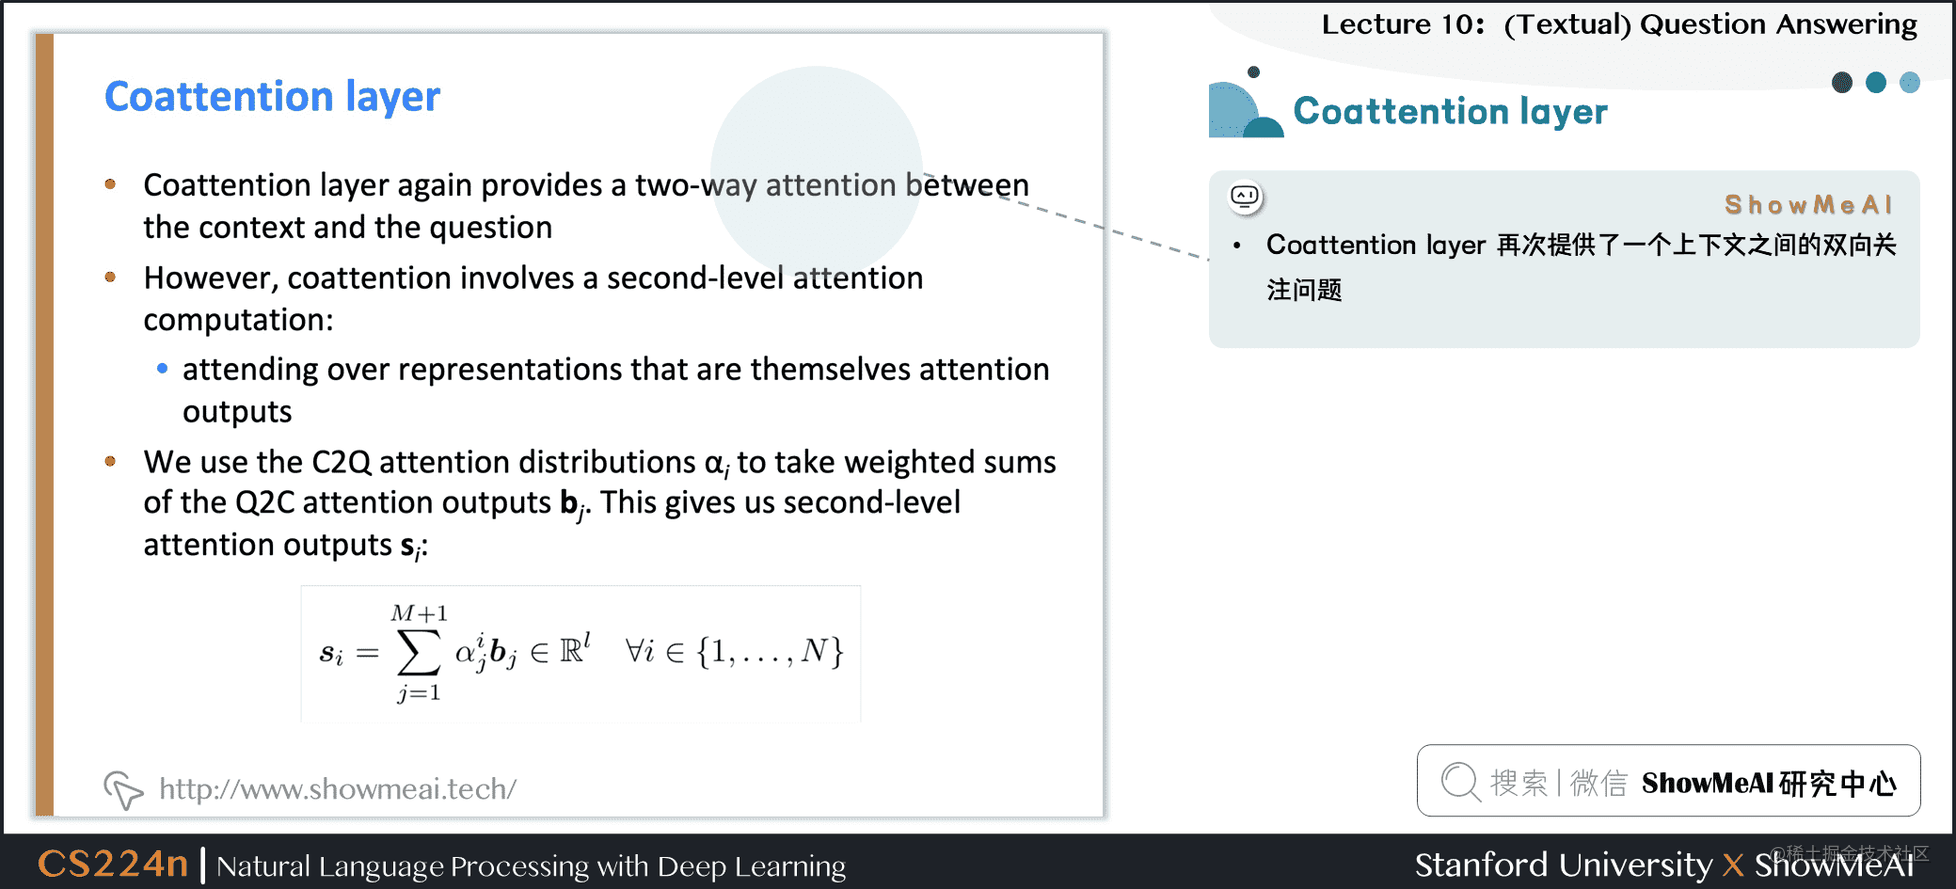 Coattention layer